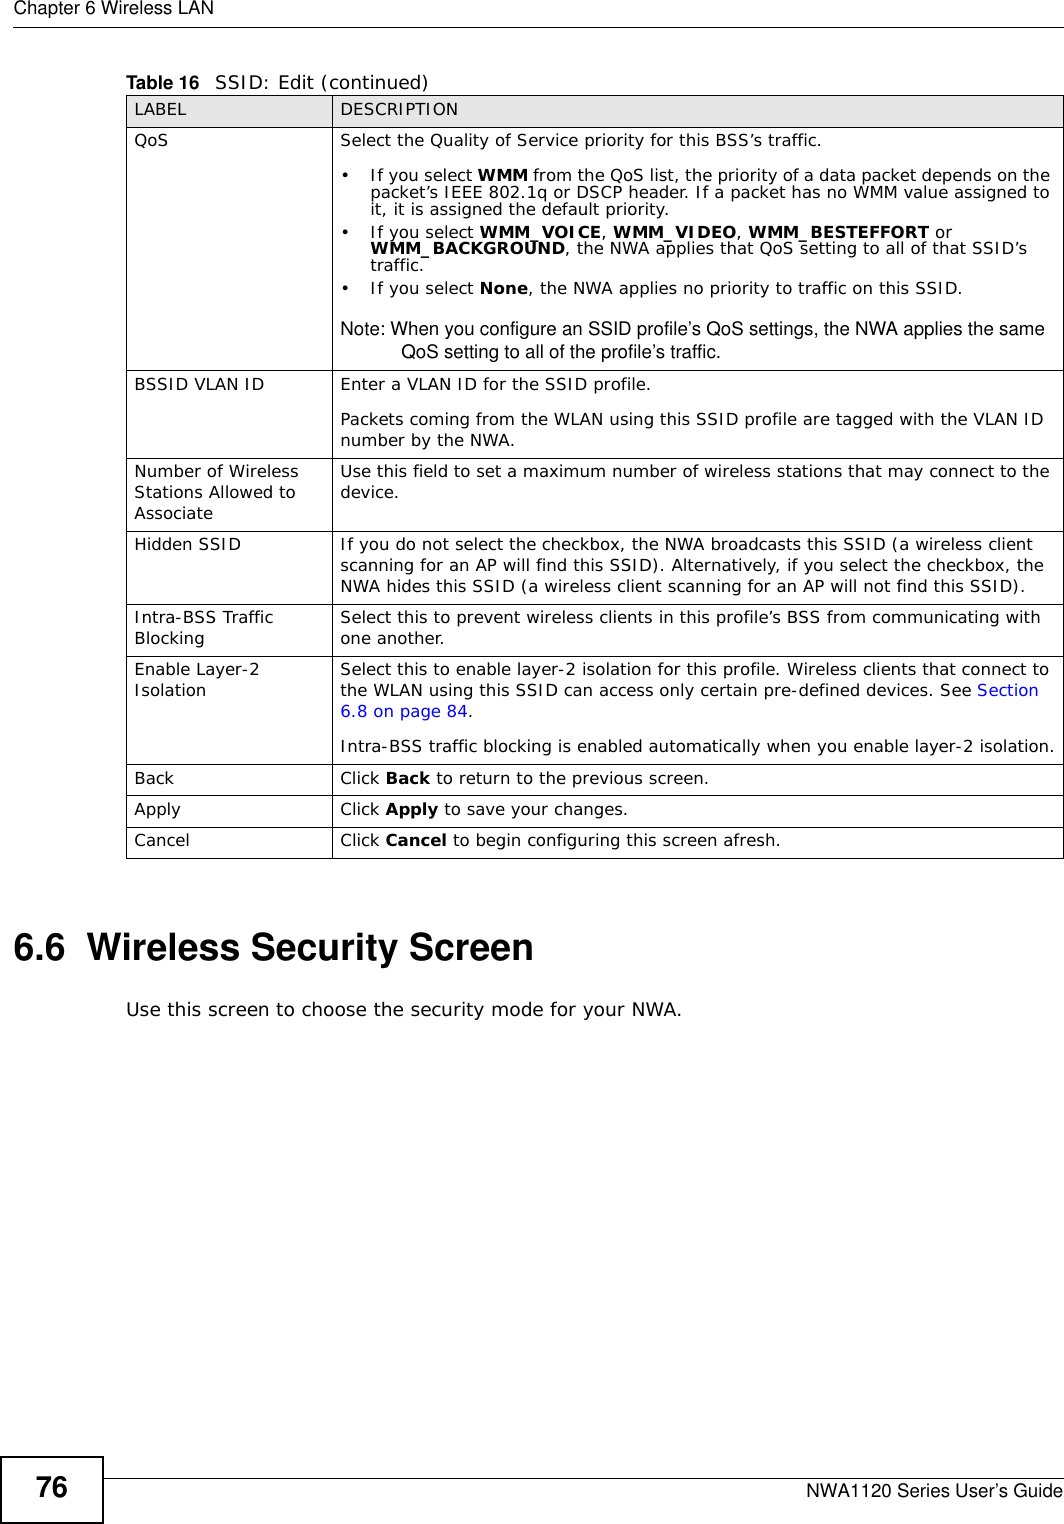 Chapter 6 Wireless LANNWA1120 Series User’s Guide766.6  Wireless Security ScreenUse this screen to choose the security mode for your NWA. QoS Select the Quality of Service priority for this BSS’s traffic. • If you select WMM from the QoS list, the priority of a data packet depends on the packet’s IEEE 802.1q or DSCP header. If a packet has no WMM value assigned to it, it is assigned the default priority.•If you select WMM_VOICE, WMM_VIDEO, WMM_BESTEFFORT or WMM_BACKGROUND, the NWA applies that QoS setting to all of that SSID’s traffic. •If you select None, the NWA applies no priority to traffic on this SSID. Note: When you configure an SSID profile’s QoS settings, the NWA applies the same QoS setting to all of the profile’s traffic.BSSID VLAN ID Enter a VLAN ID for the SSID profile.Packets coming from the WLAN using this SSID profile are tagged with the VLAN ID number by the NWA. Number of Wireless Stations Allowed to AssociateUse this field to set a maximum number of wireless stations that may connect to the device.Hidden SSID If you do not select the checkbox, the NWA broadcasts this SSID (a wireless client scanning for an AP will find this SSID). Alternatively, if you select the checkbox, the NWA hides this SSID (a wireless client scanning for an AP will not find this SSID).Intra-BSS Traffic Blocking Select this to prevent wireless clients in this profile’s BSS from communicating with one another.Enable Layer-2 Isolation  Select this to enable layer-2 isolation for this profile. Wireless clients that connect to the WLAN using this SSID can access only certain pre-defined devices. See Section 6.8 on page 84.Intra-BSS traffic blocking is enabled automatically when you enable layer-2 isolation.Back Click Back to return to the previous screen.Apply Click Apply to save your changes.Cancel Click Cancel to begin configuring this screen afresh.Table 16   SSID: Edit (continued)LABEL DESCRIPTION